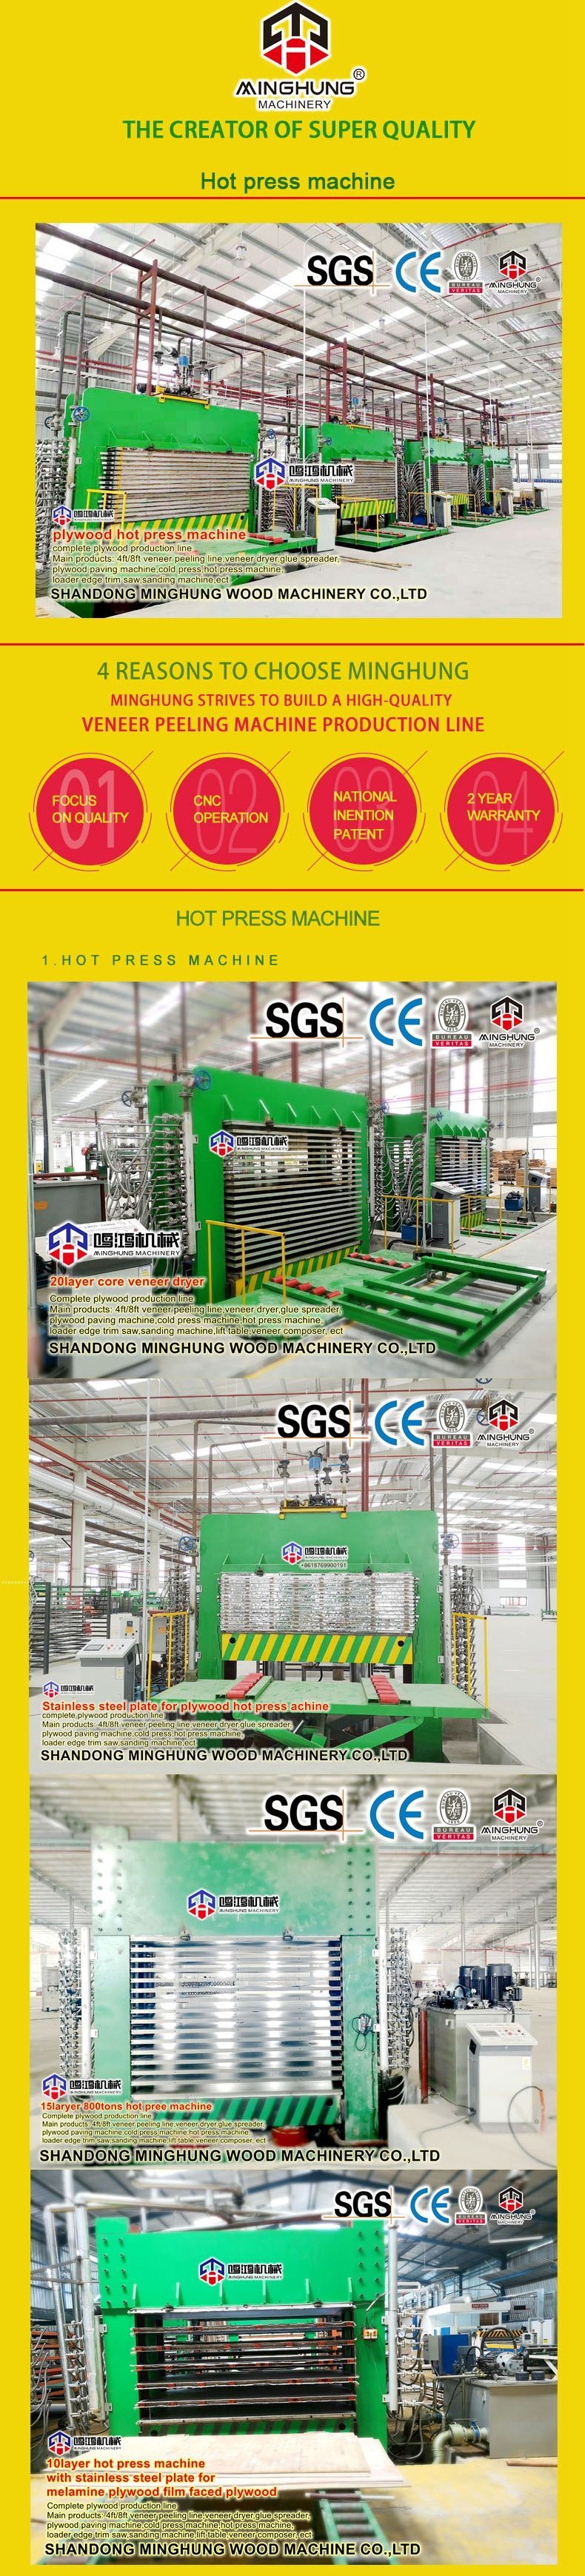 15layers 500t Film Faced Plywood Hot Press Machine